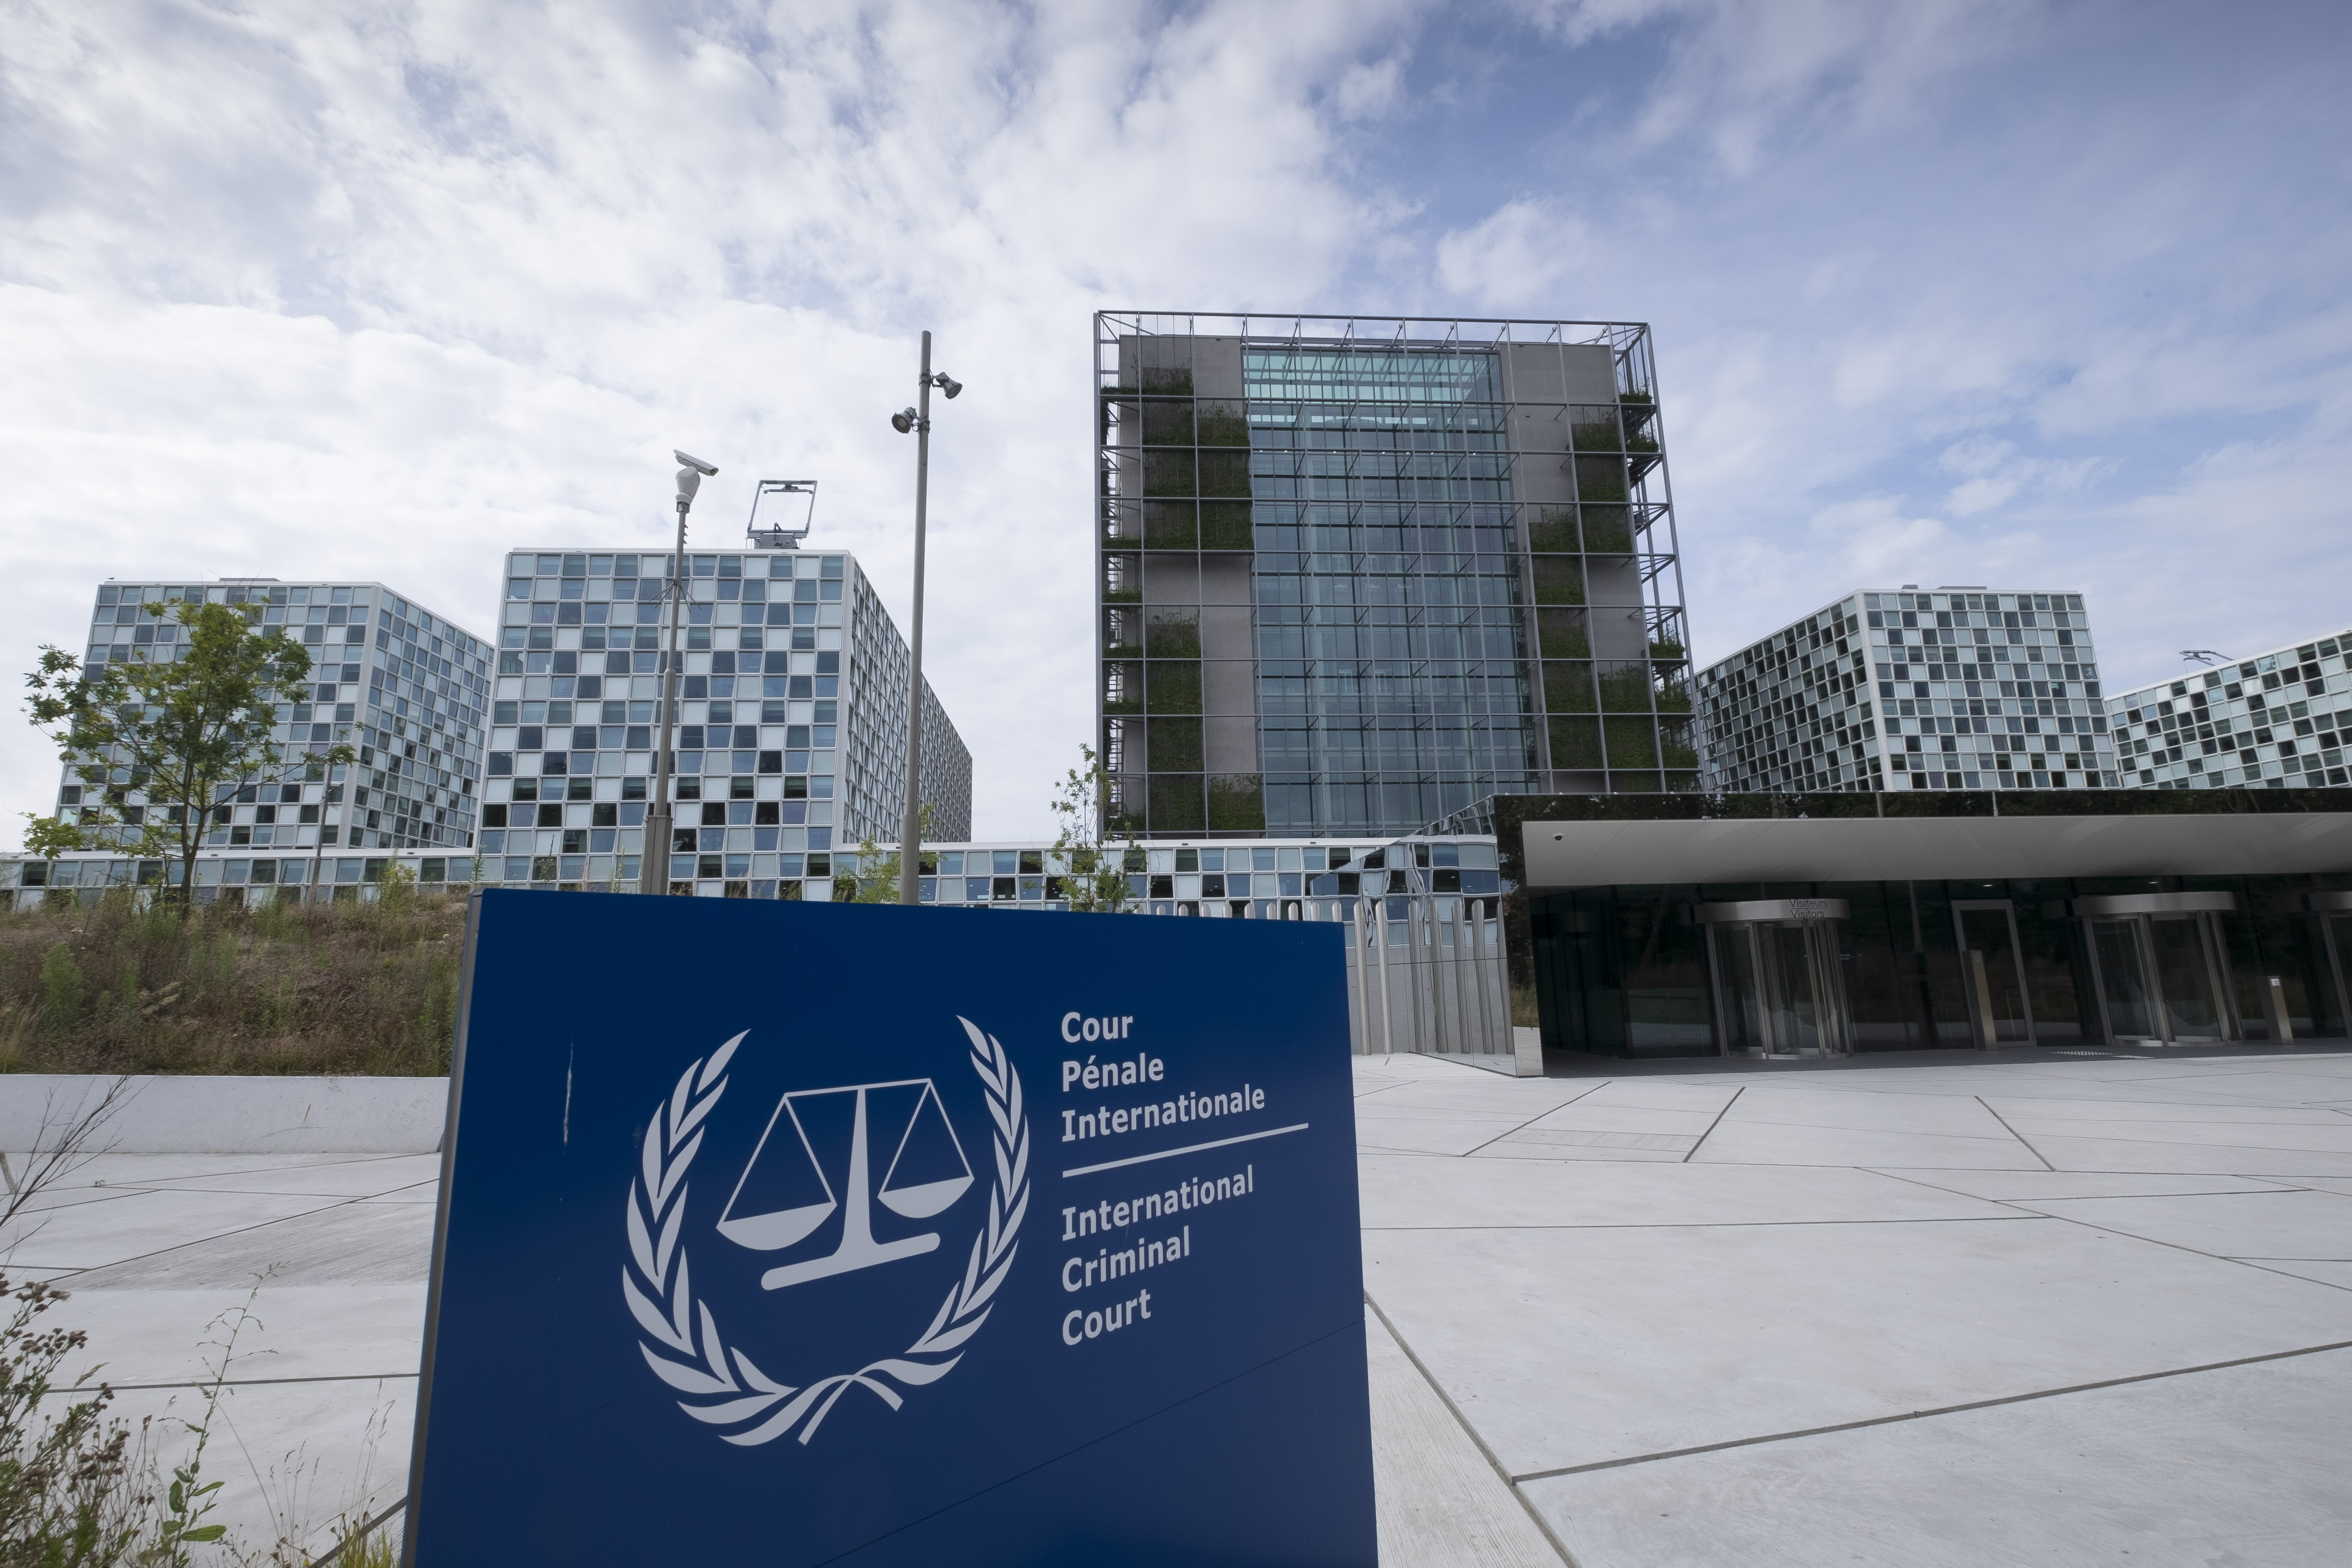 The International Criminal Court building in The Hague on July 30, 2016 in The Hague, The Netherlands. 